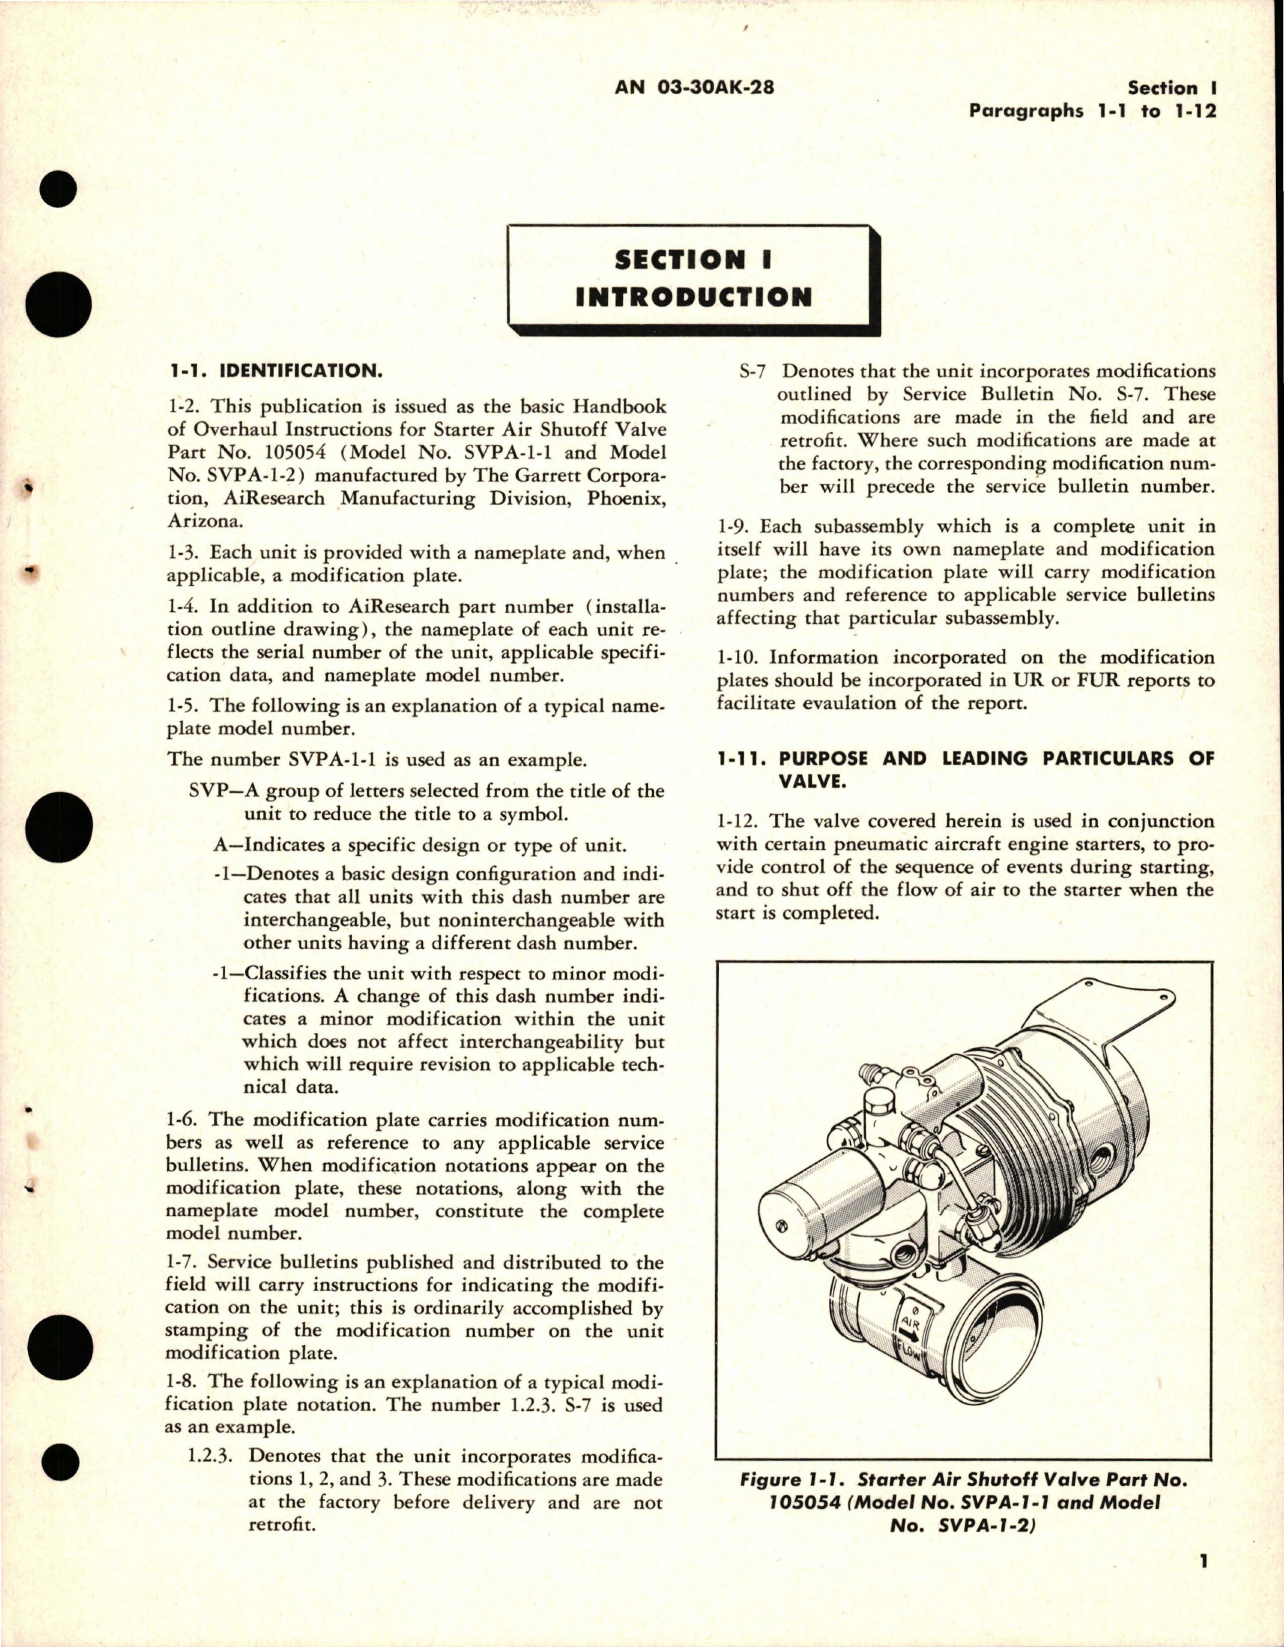 Sample page 5 from AirCorps Library document: Overhaul Instructions for Starter Air Shutoff Valve - Part 105054 - Model SVPA-1 